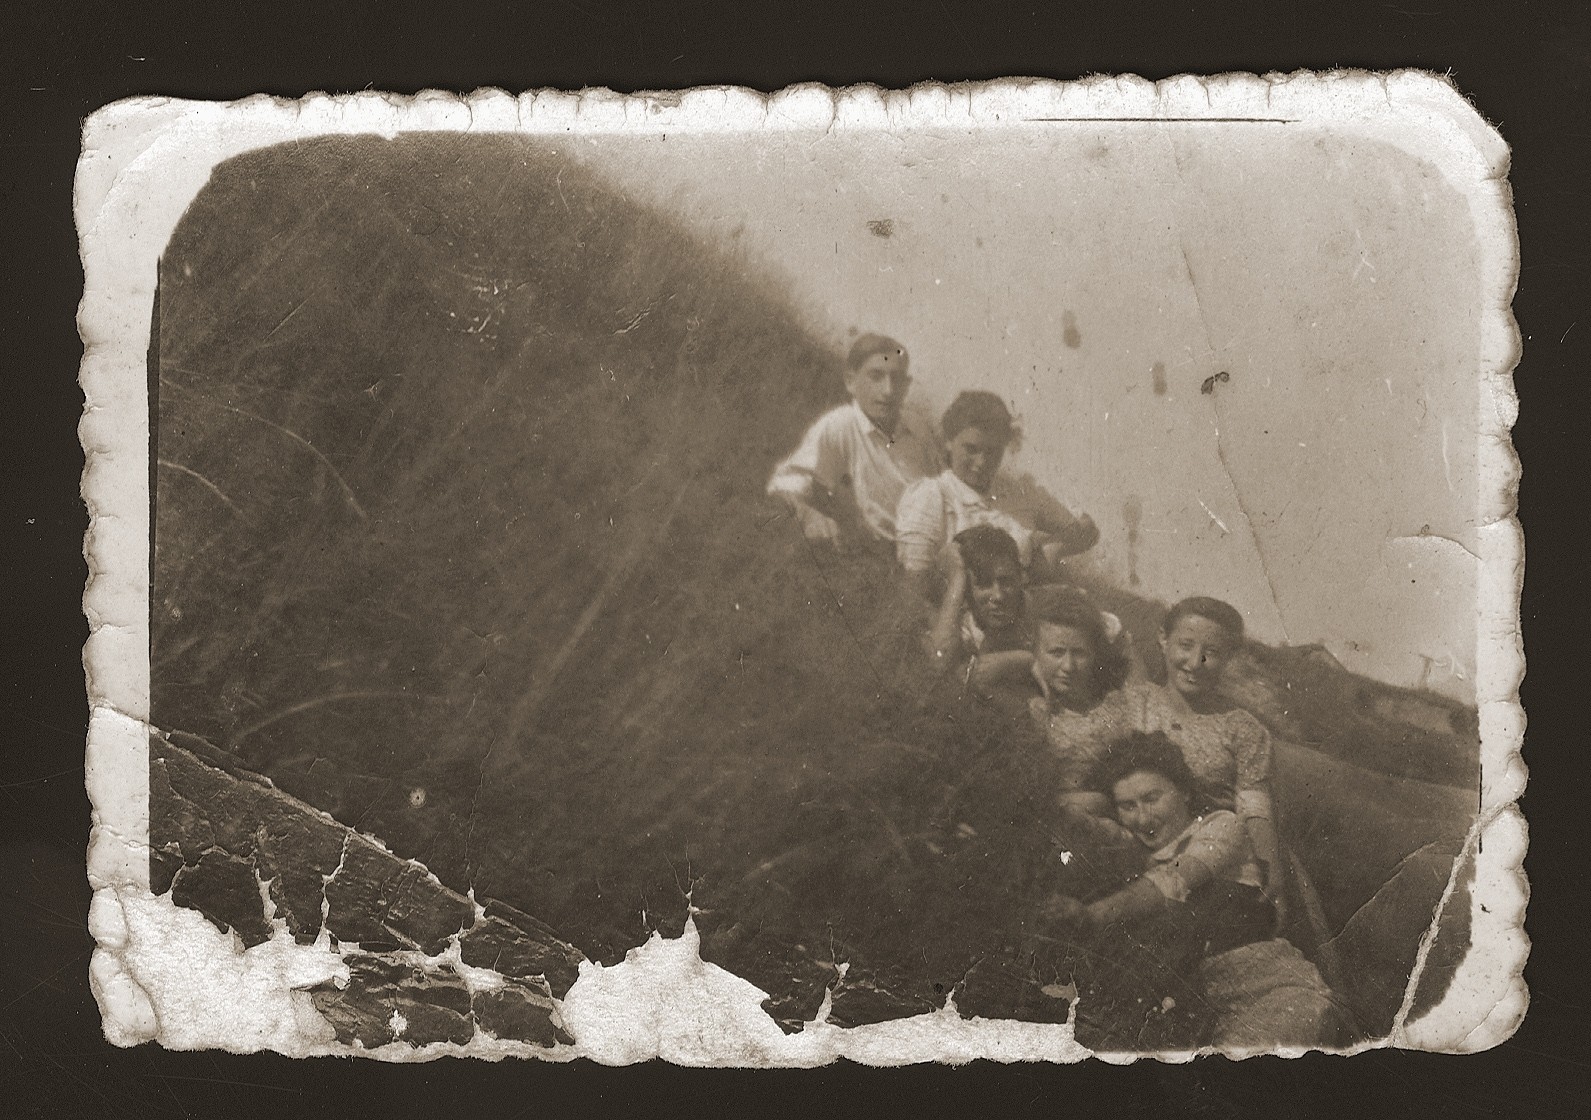 Jewish youth lying on a grassy hilltop in Dabrowa Gornicza, Poland.

Among those pictured are Moniek Rozen (first from the left) and Sabina Szeps.  Szeps gave this photo to Rozen during their imprisonment in the Gruenberg labor camp.